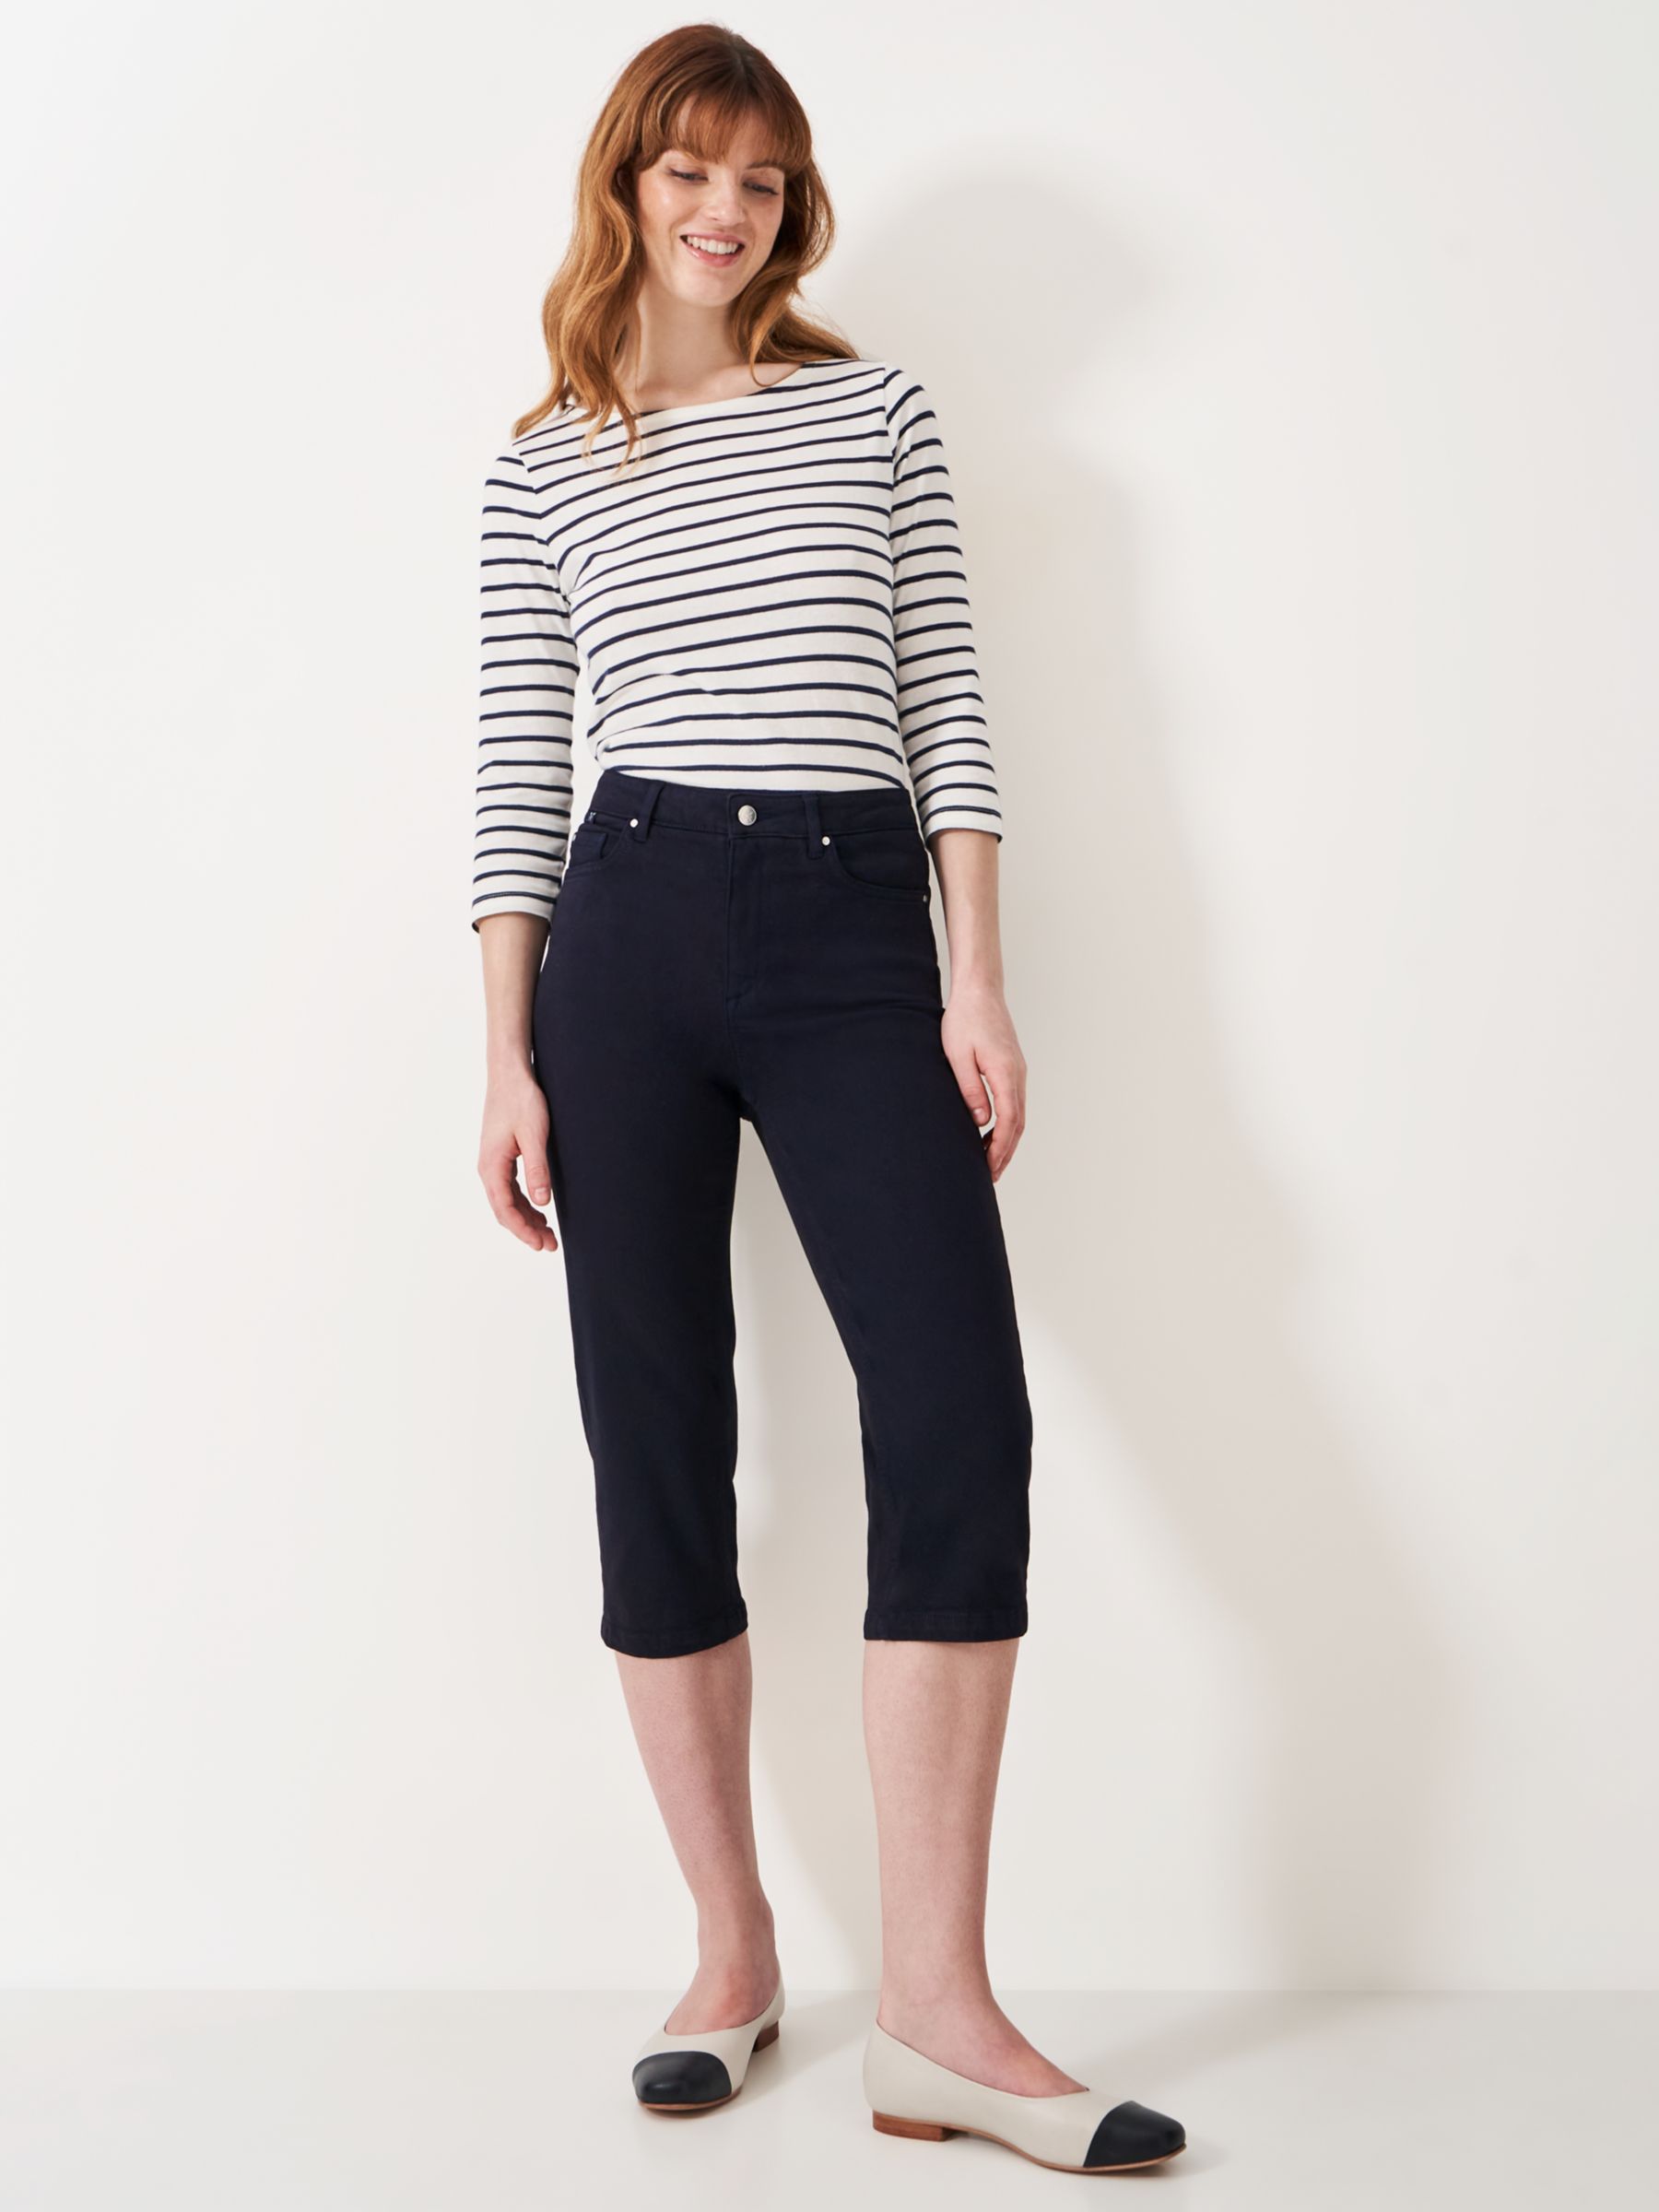 Buy Crew Clothing Mia Cropped Jeans Online at johnlewis.com